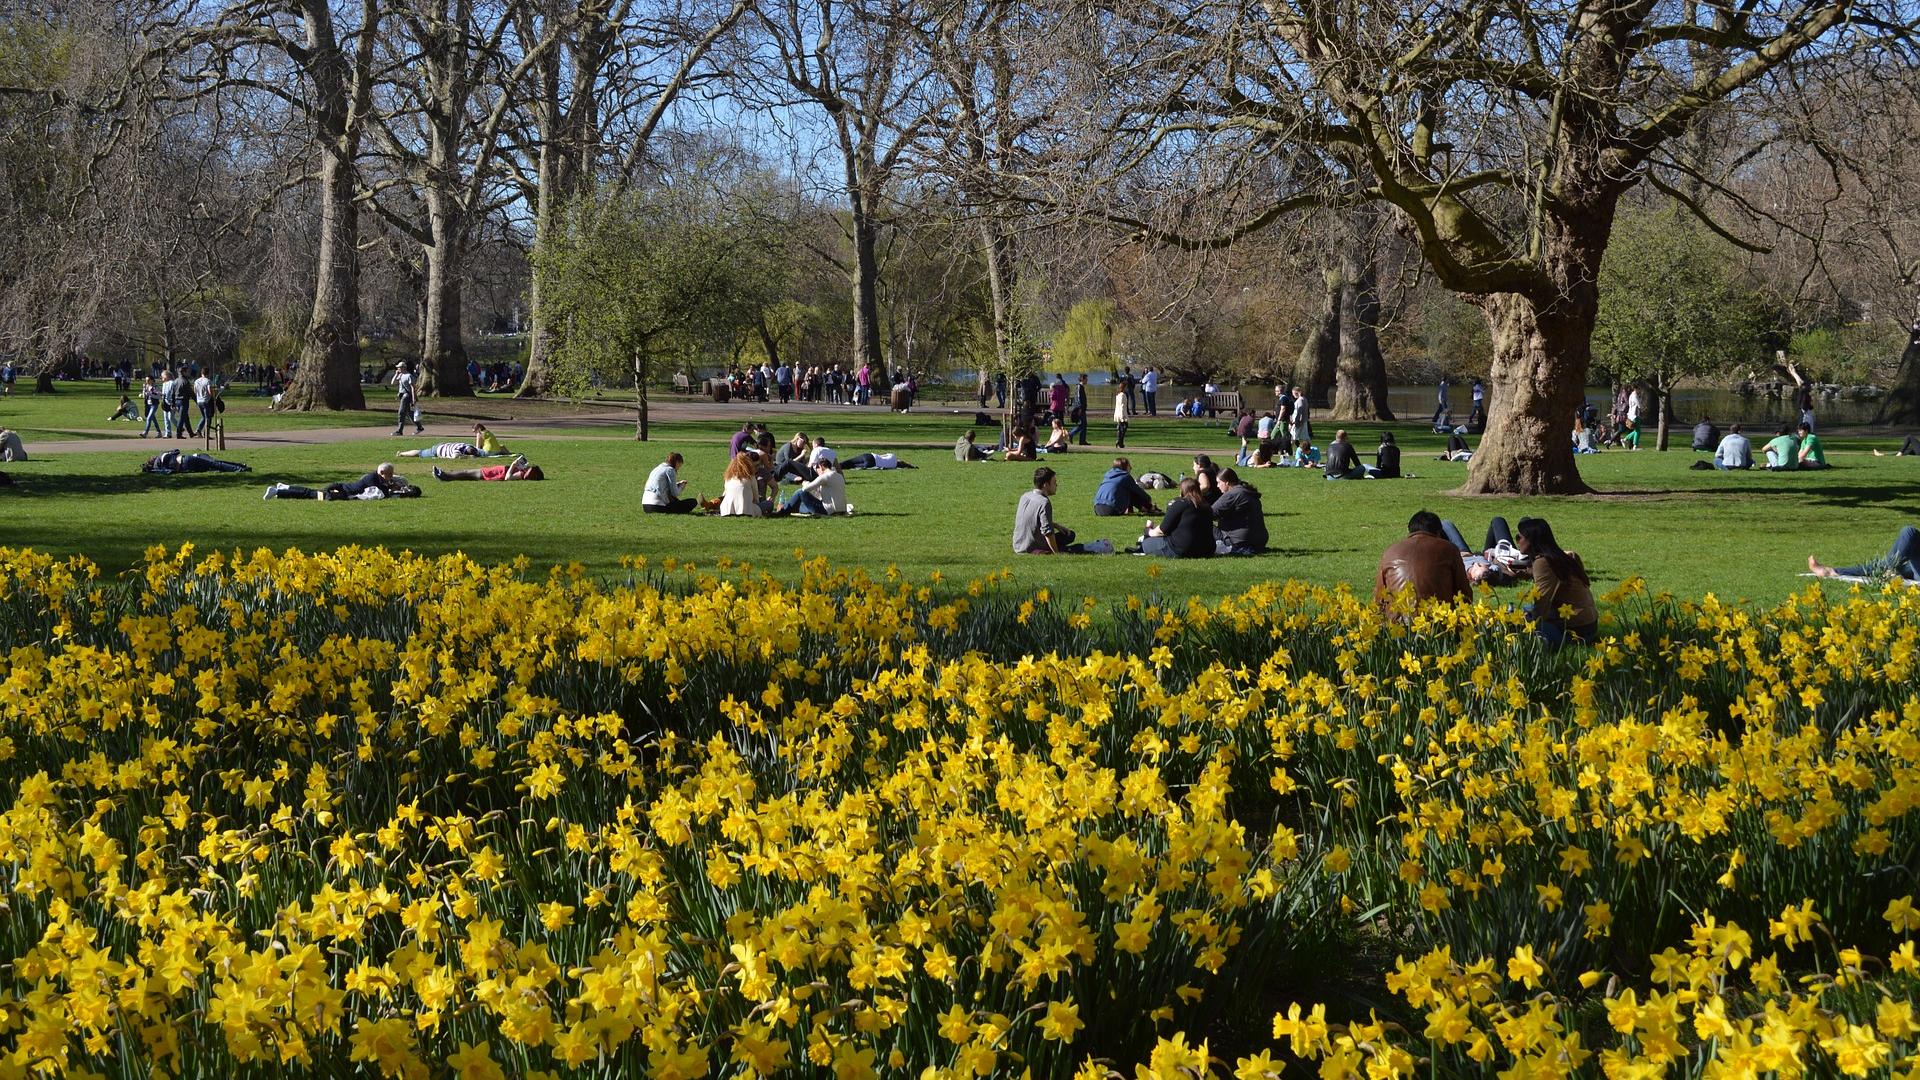 People sitting on grass in open space, St James's Park, London